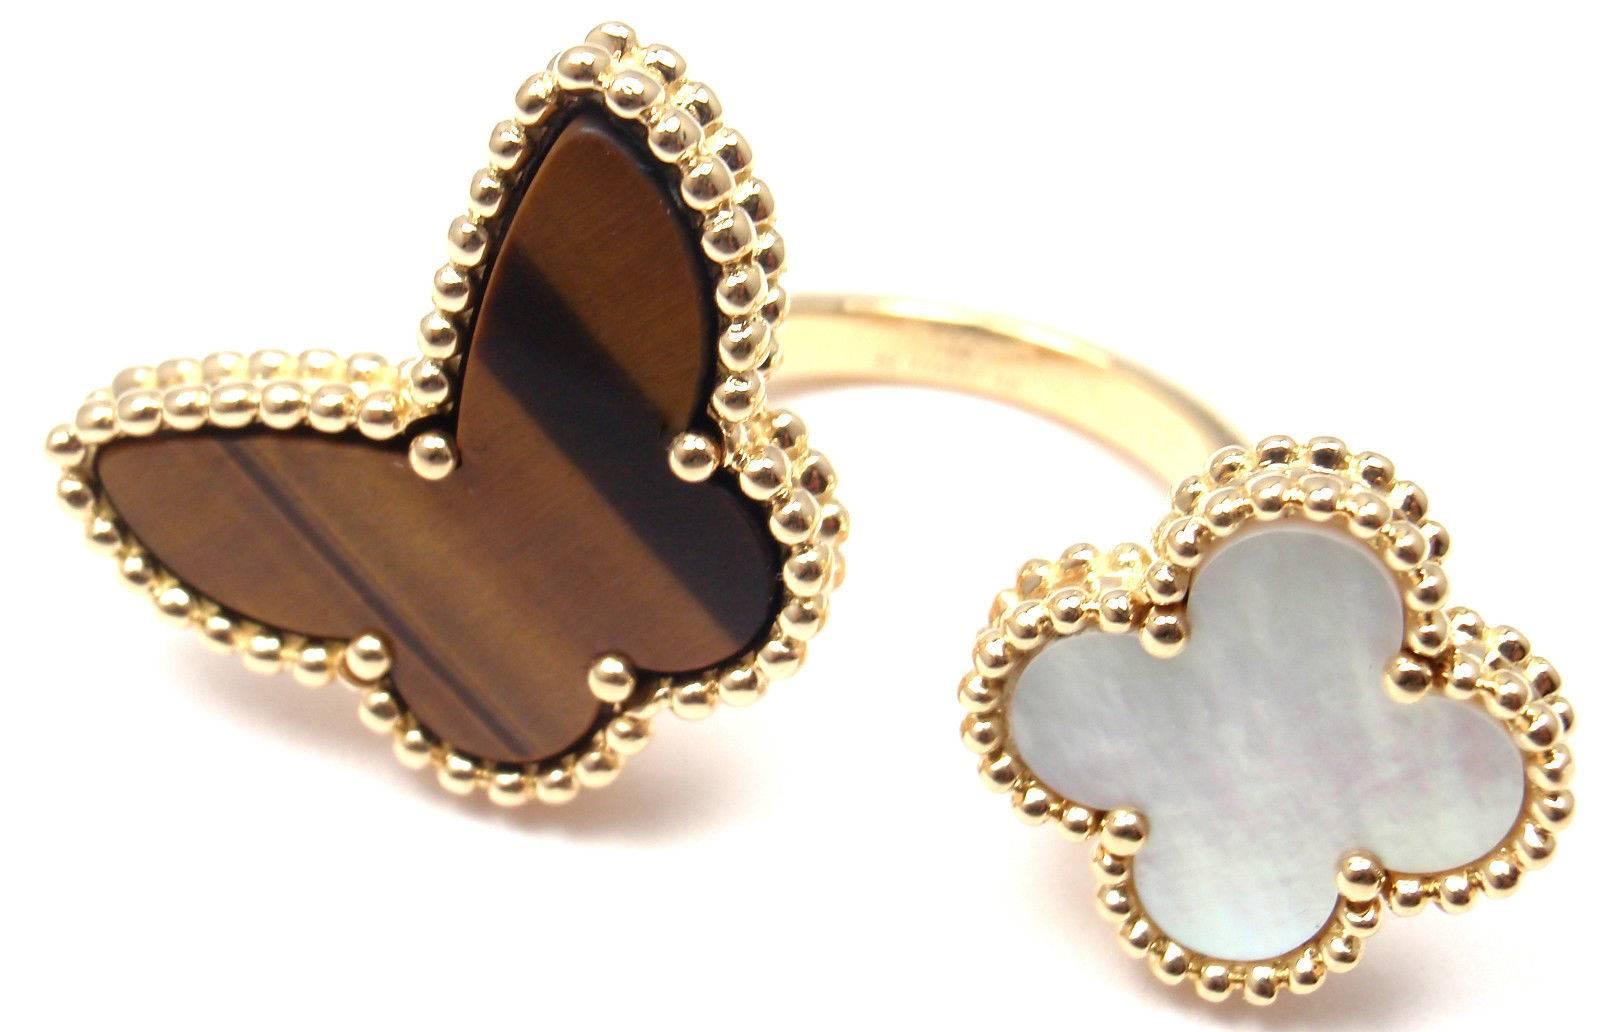 18k Yellow Gold Tigers Eye And Mother Of Pearl  Lucky Alhambra Between The Finger Ring by Van Cleef & Arpels.
With Butterfly shape tiger eye And
Mother of Pearl alhambra

This ring comes with Van Cleef & Arpels box.

Details:
Size - 5 1/4 US,